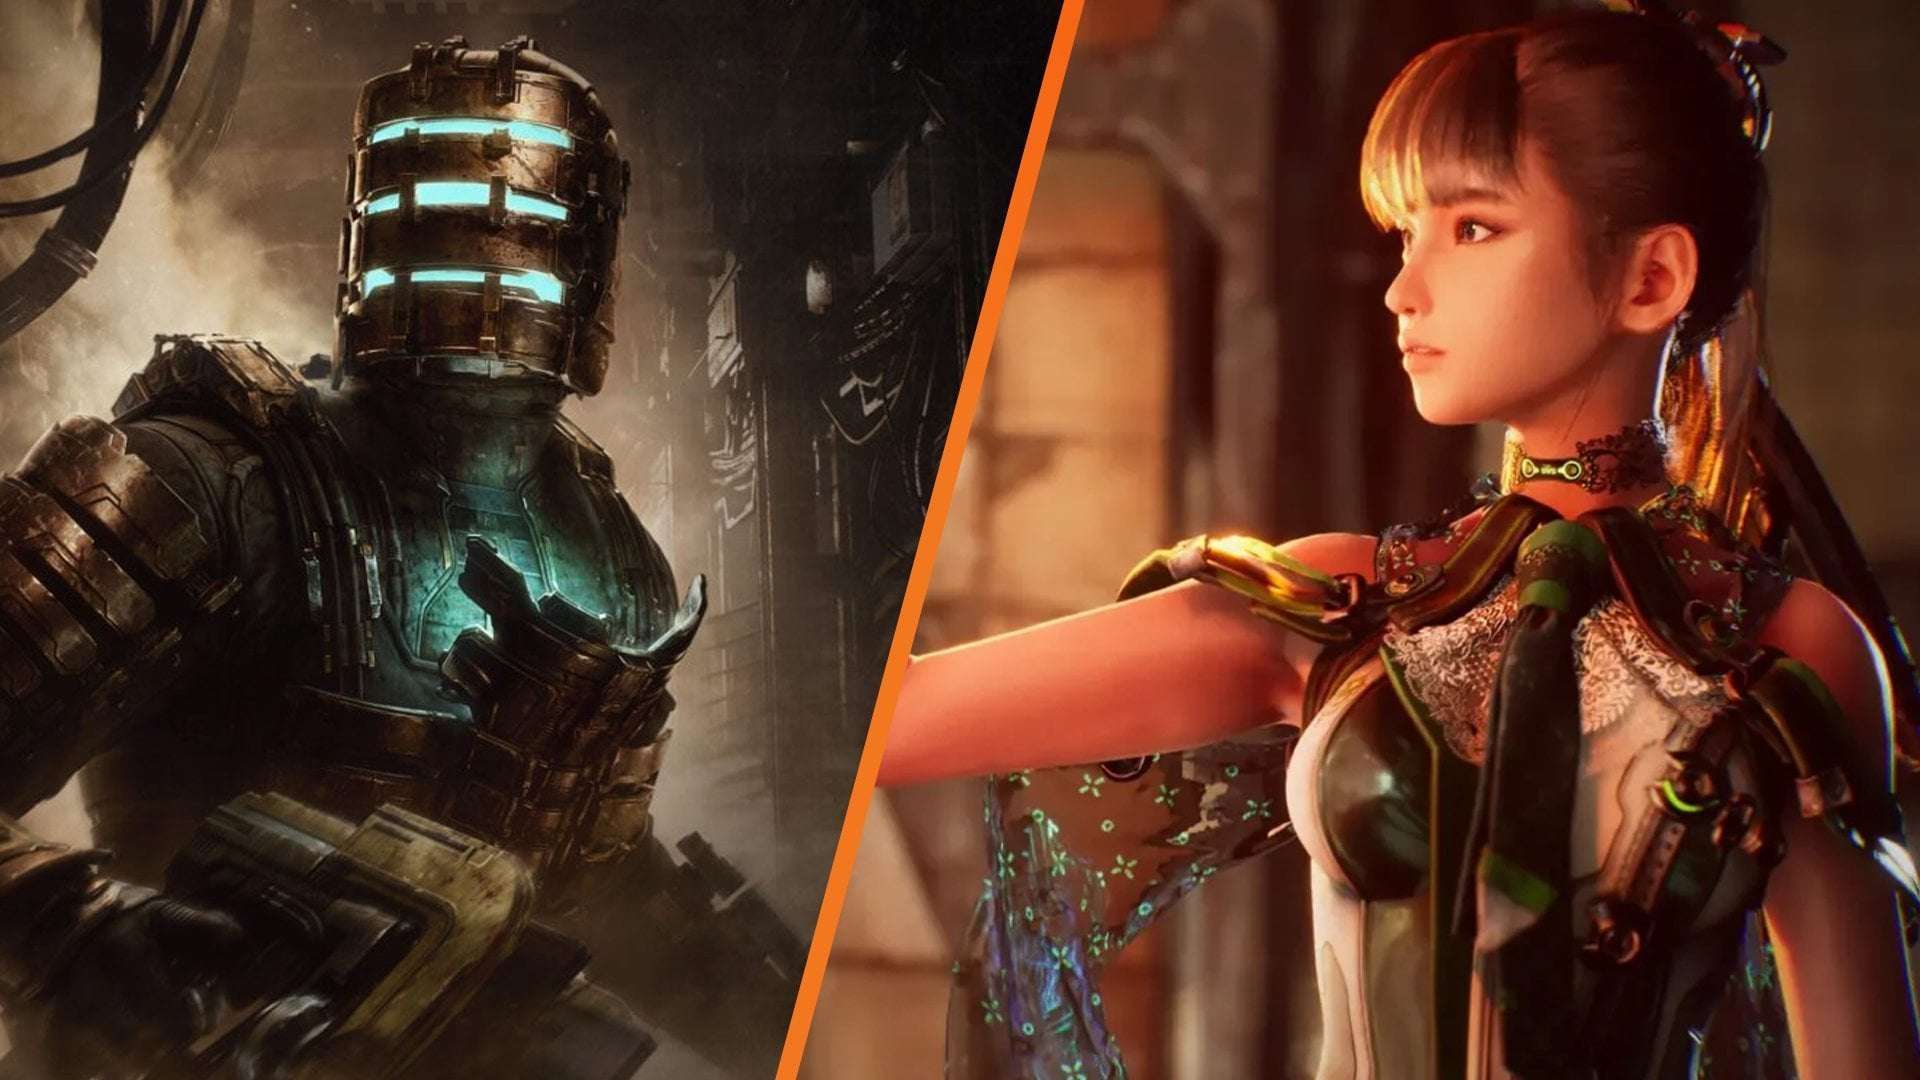 image for EA Japan exec criticises Japanese rating board for banning Dead Space, but passing Stellar Blade